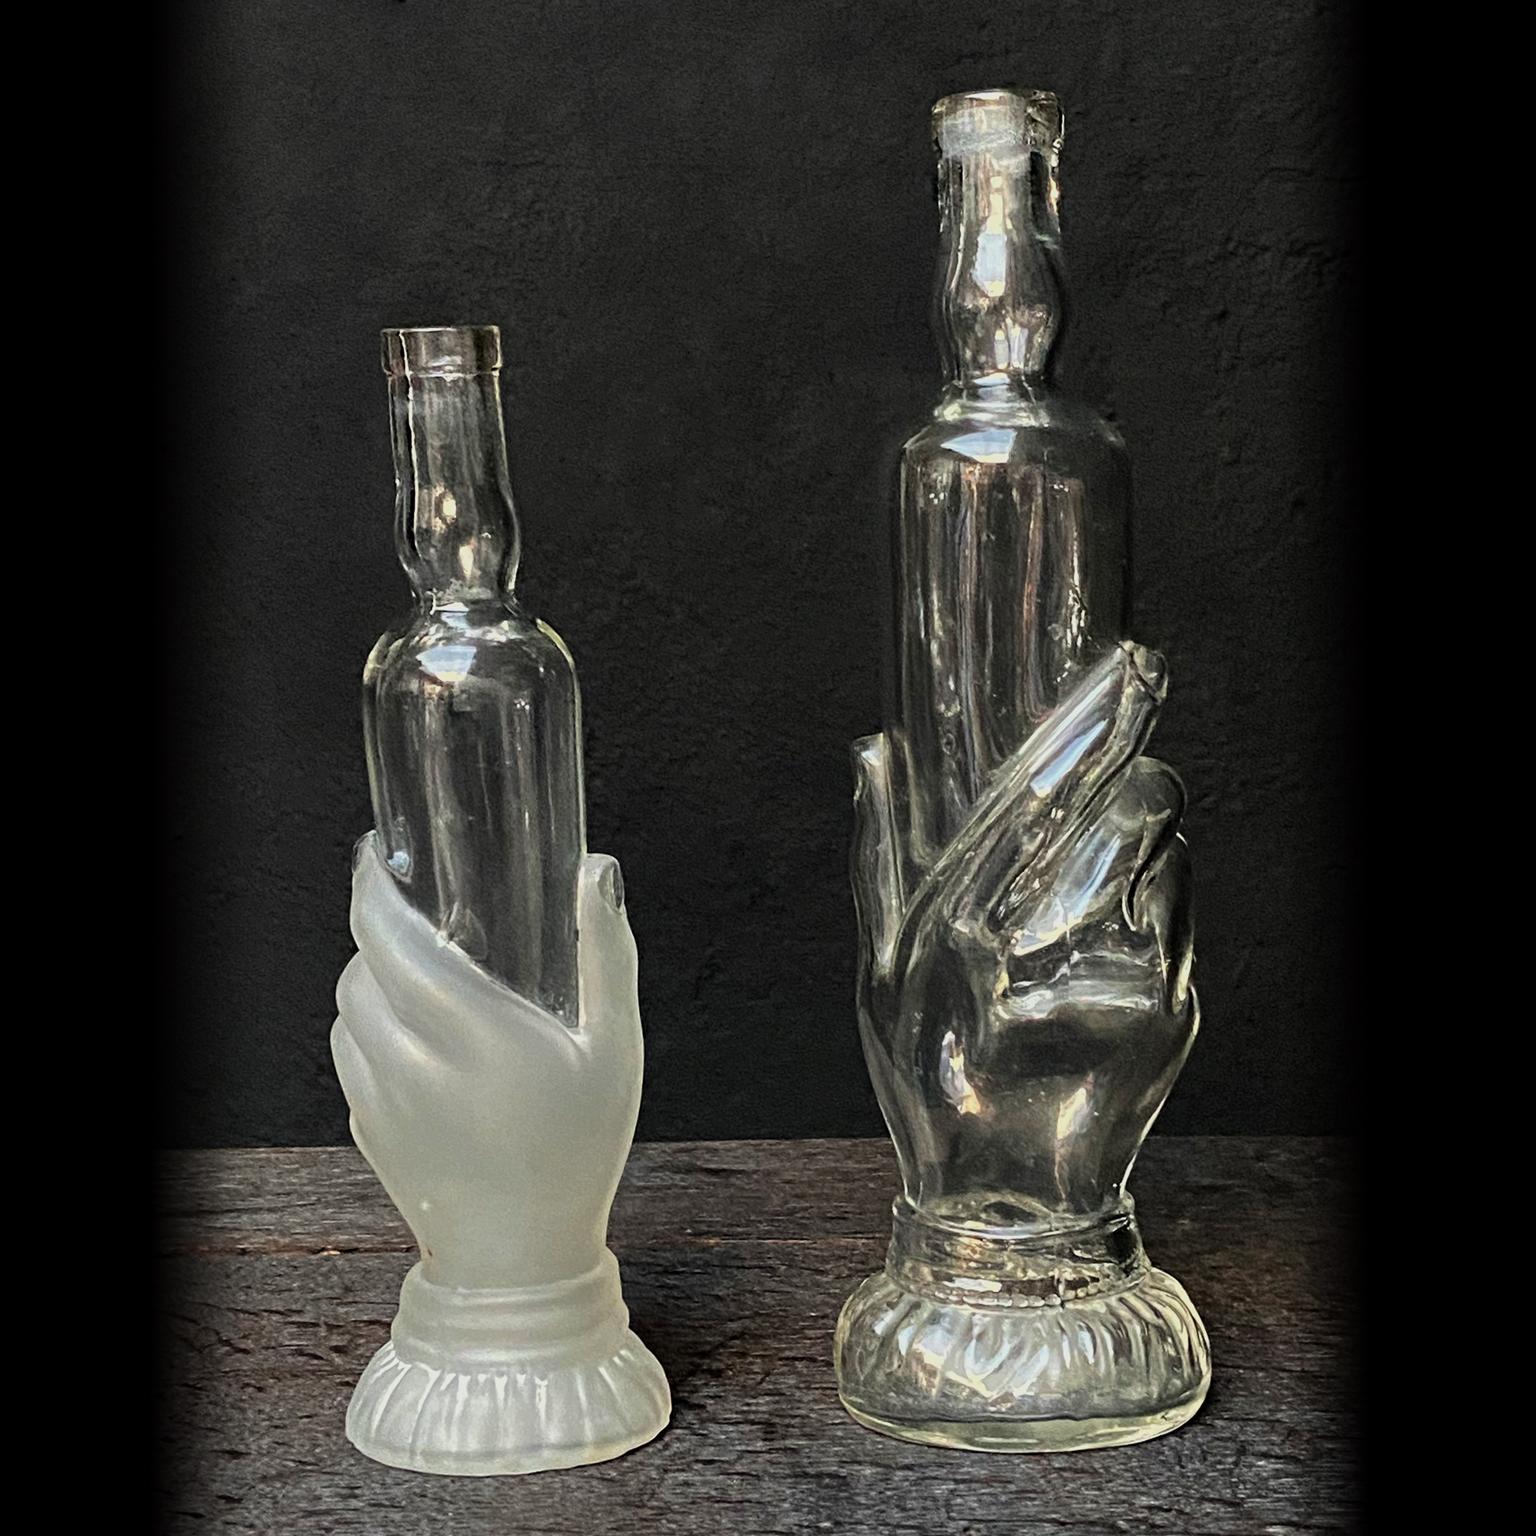 Set of two beautiful bath soap, foam or beauty oil bottles. The hand shaped bottles have beautiful details like cuffed and buttoned sleeves from which the hands appear, holding an elegant shaped bottle. 
All bottles are blown by hand as they clearly